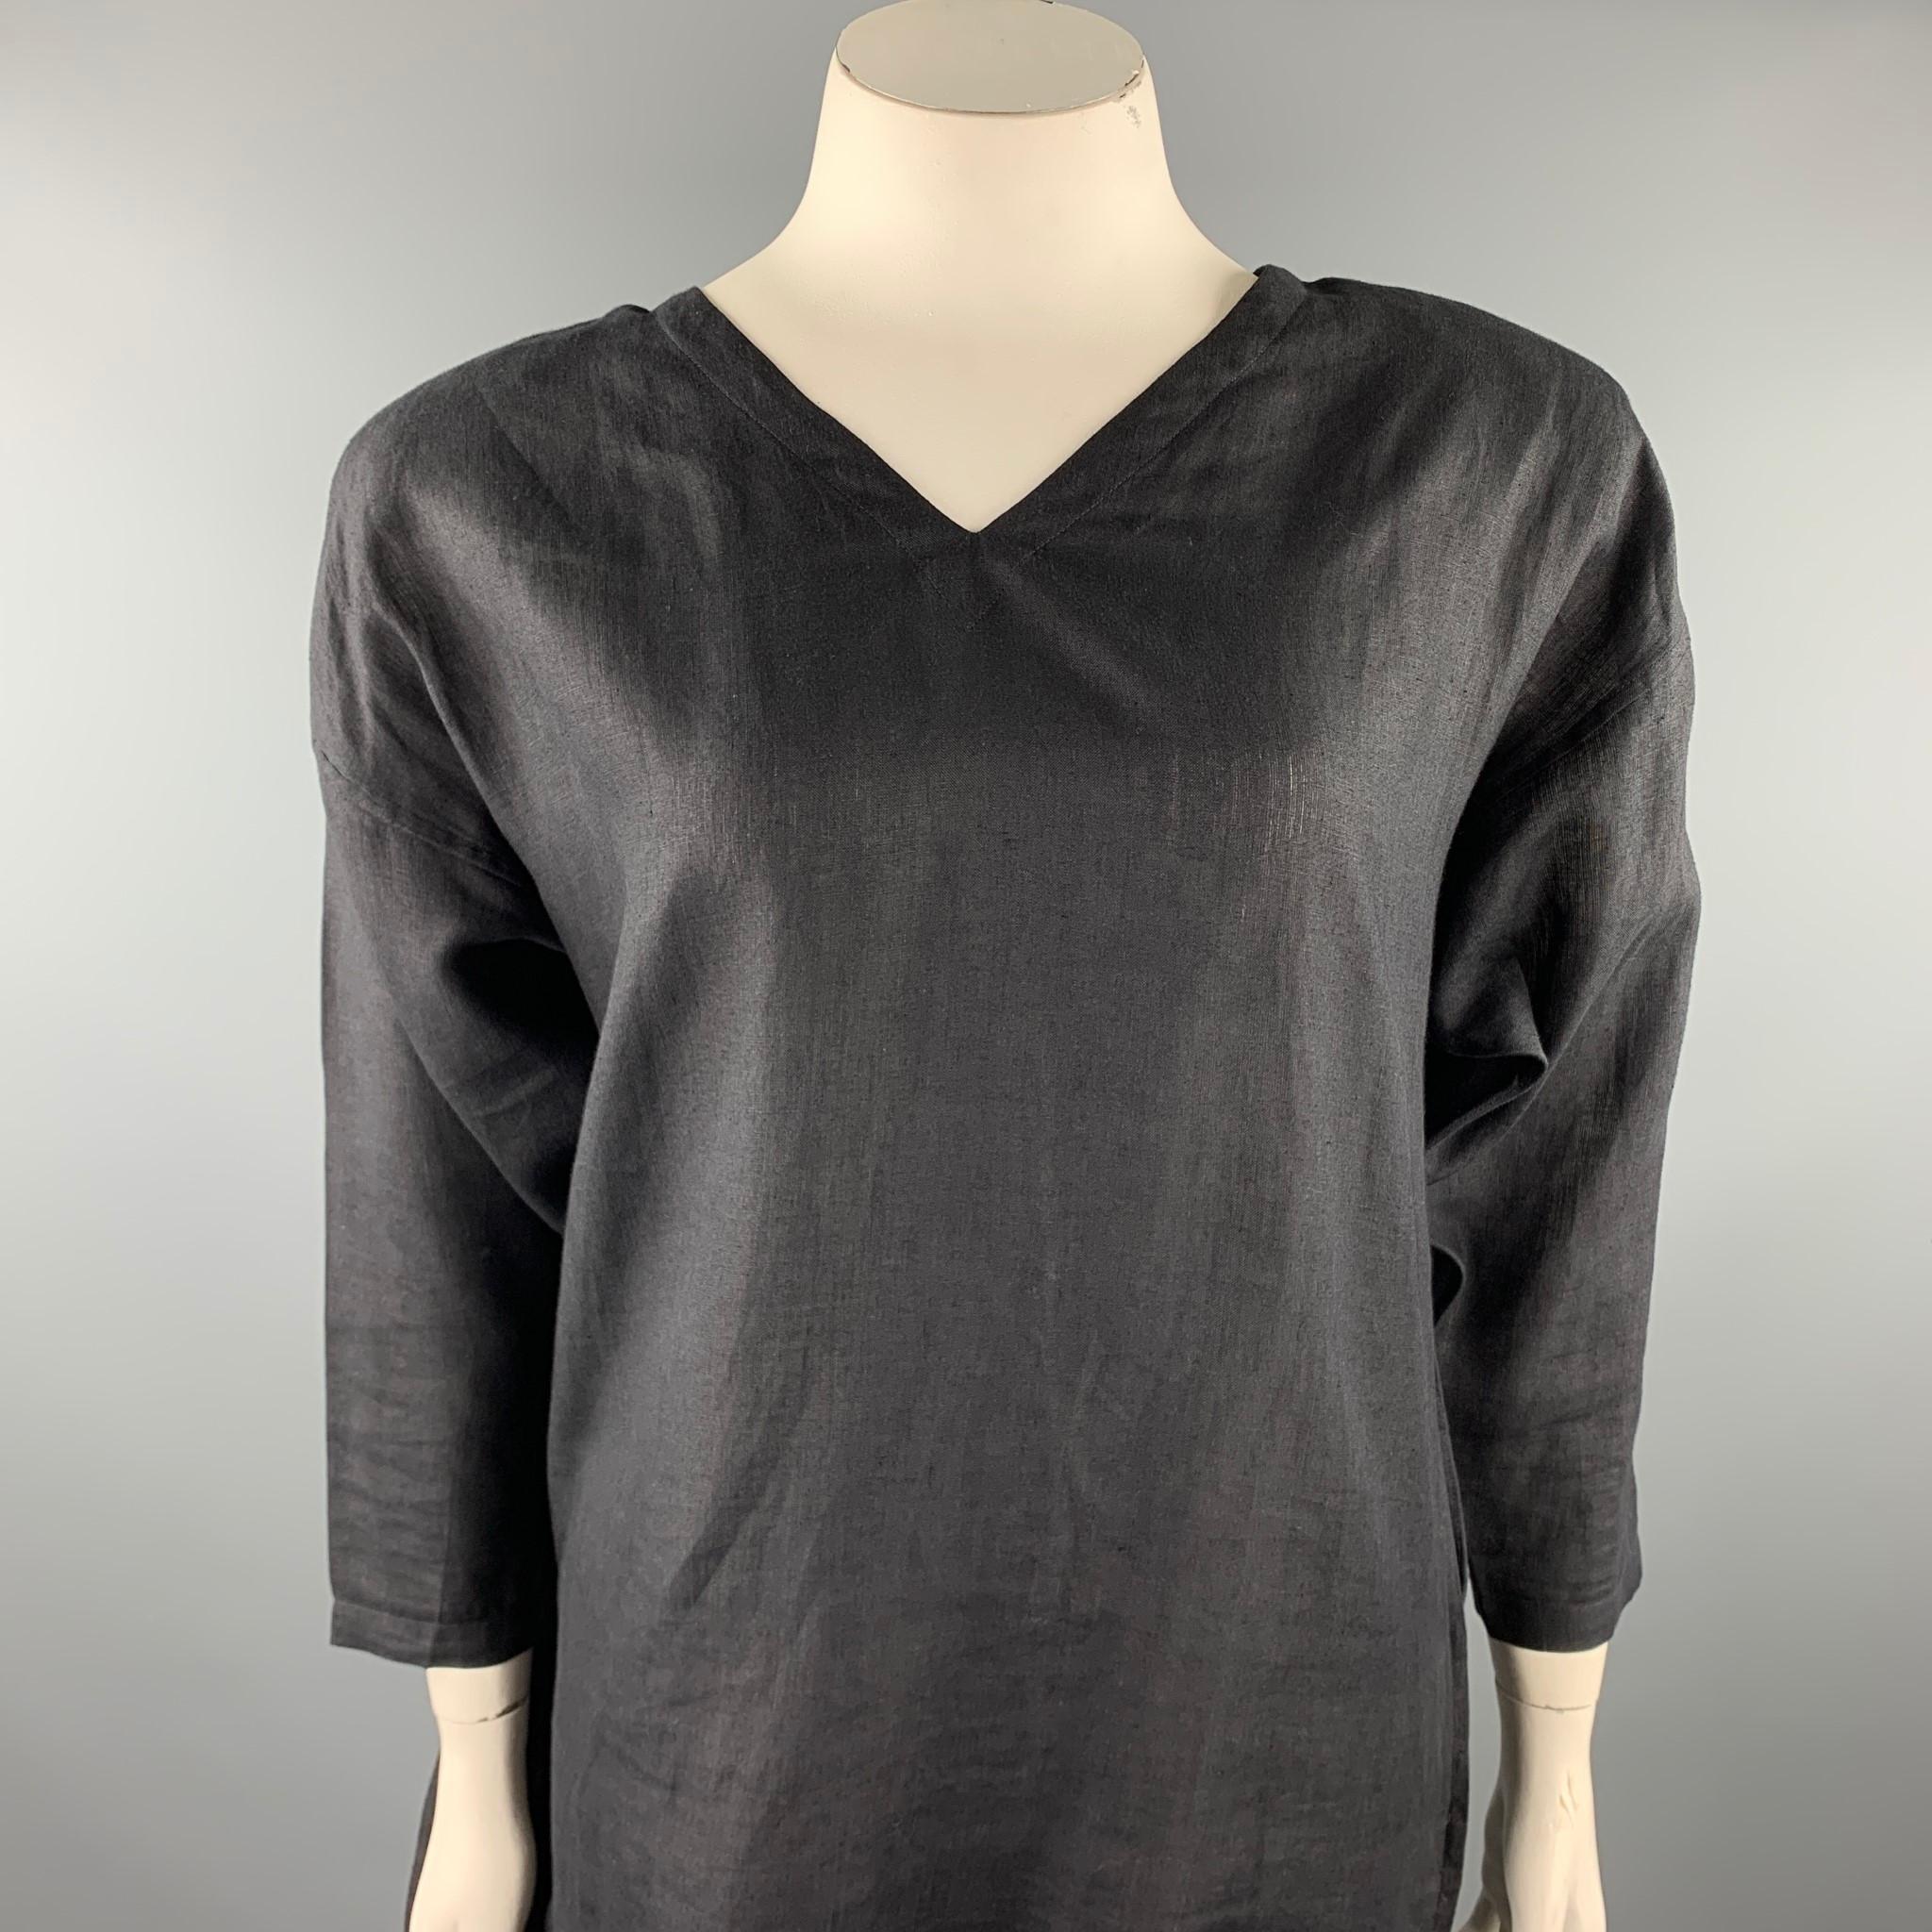 SHAMASK dress comes in a black linen featuring a long front panel design, 3/4 sleeves, shoulder pads, and a back buttoned closure.

Very Good Pre-Owned Condition.
Marked: No size marked 

Measurements:

Shoulder: 23 in. 
Bust: 42 in. 
Waist: 40 in.